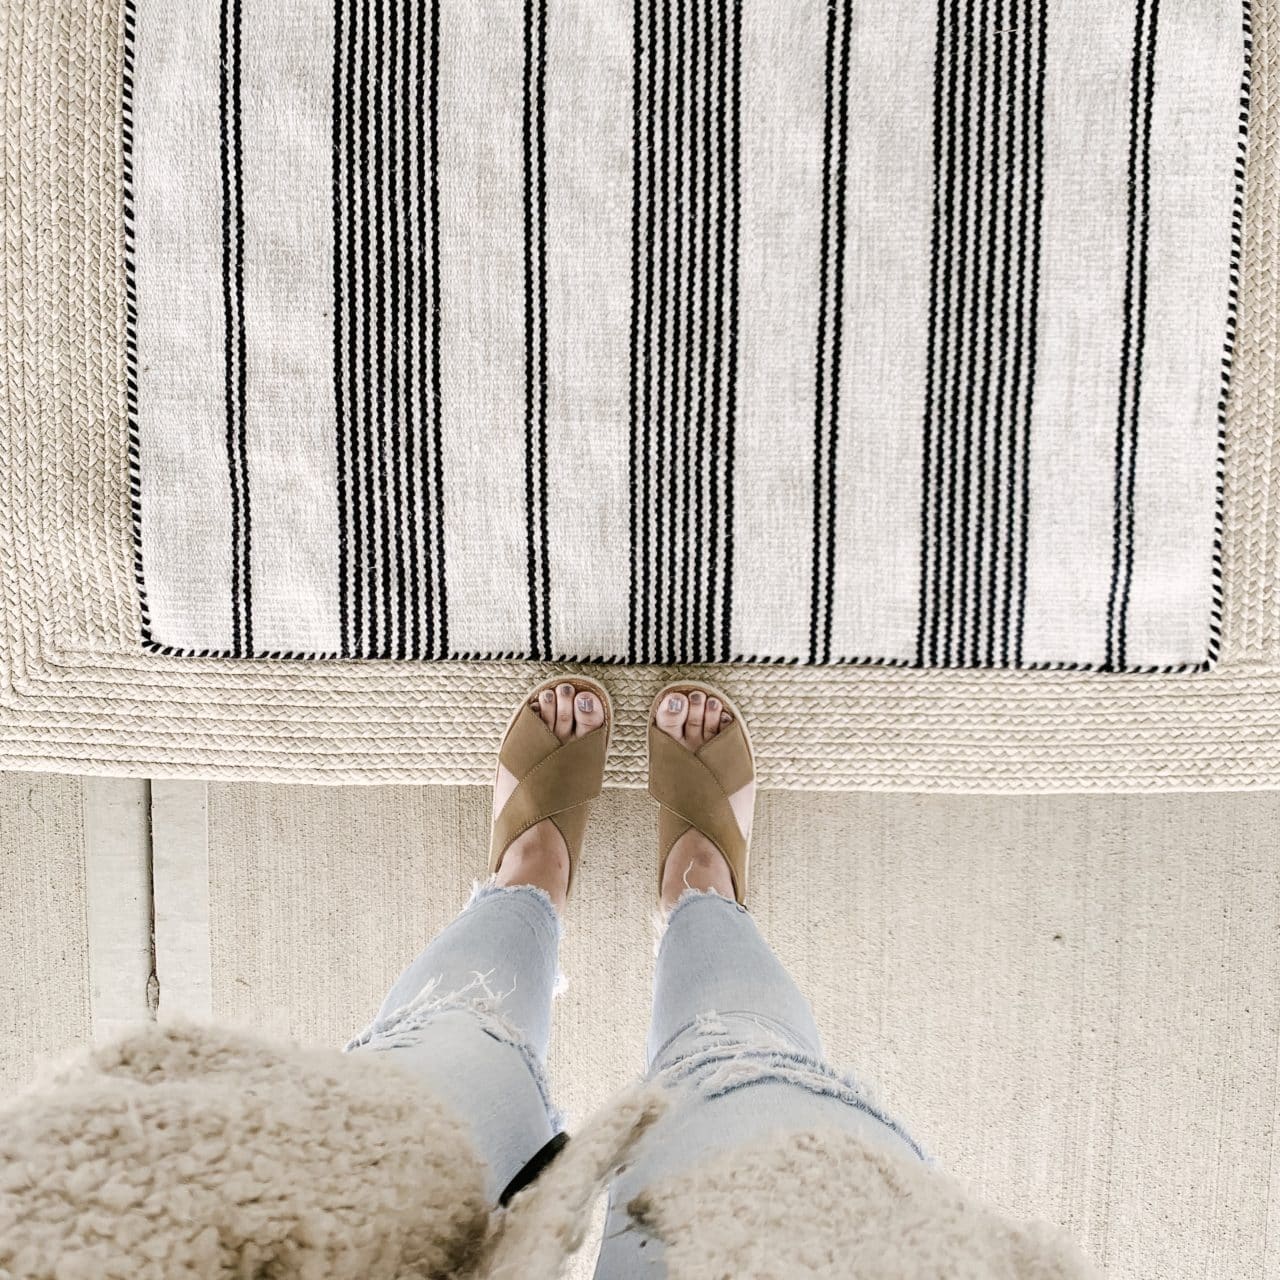 The Simple Recipe for Layering Doormats